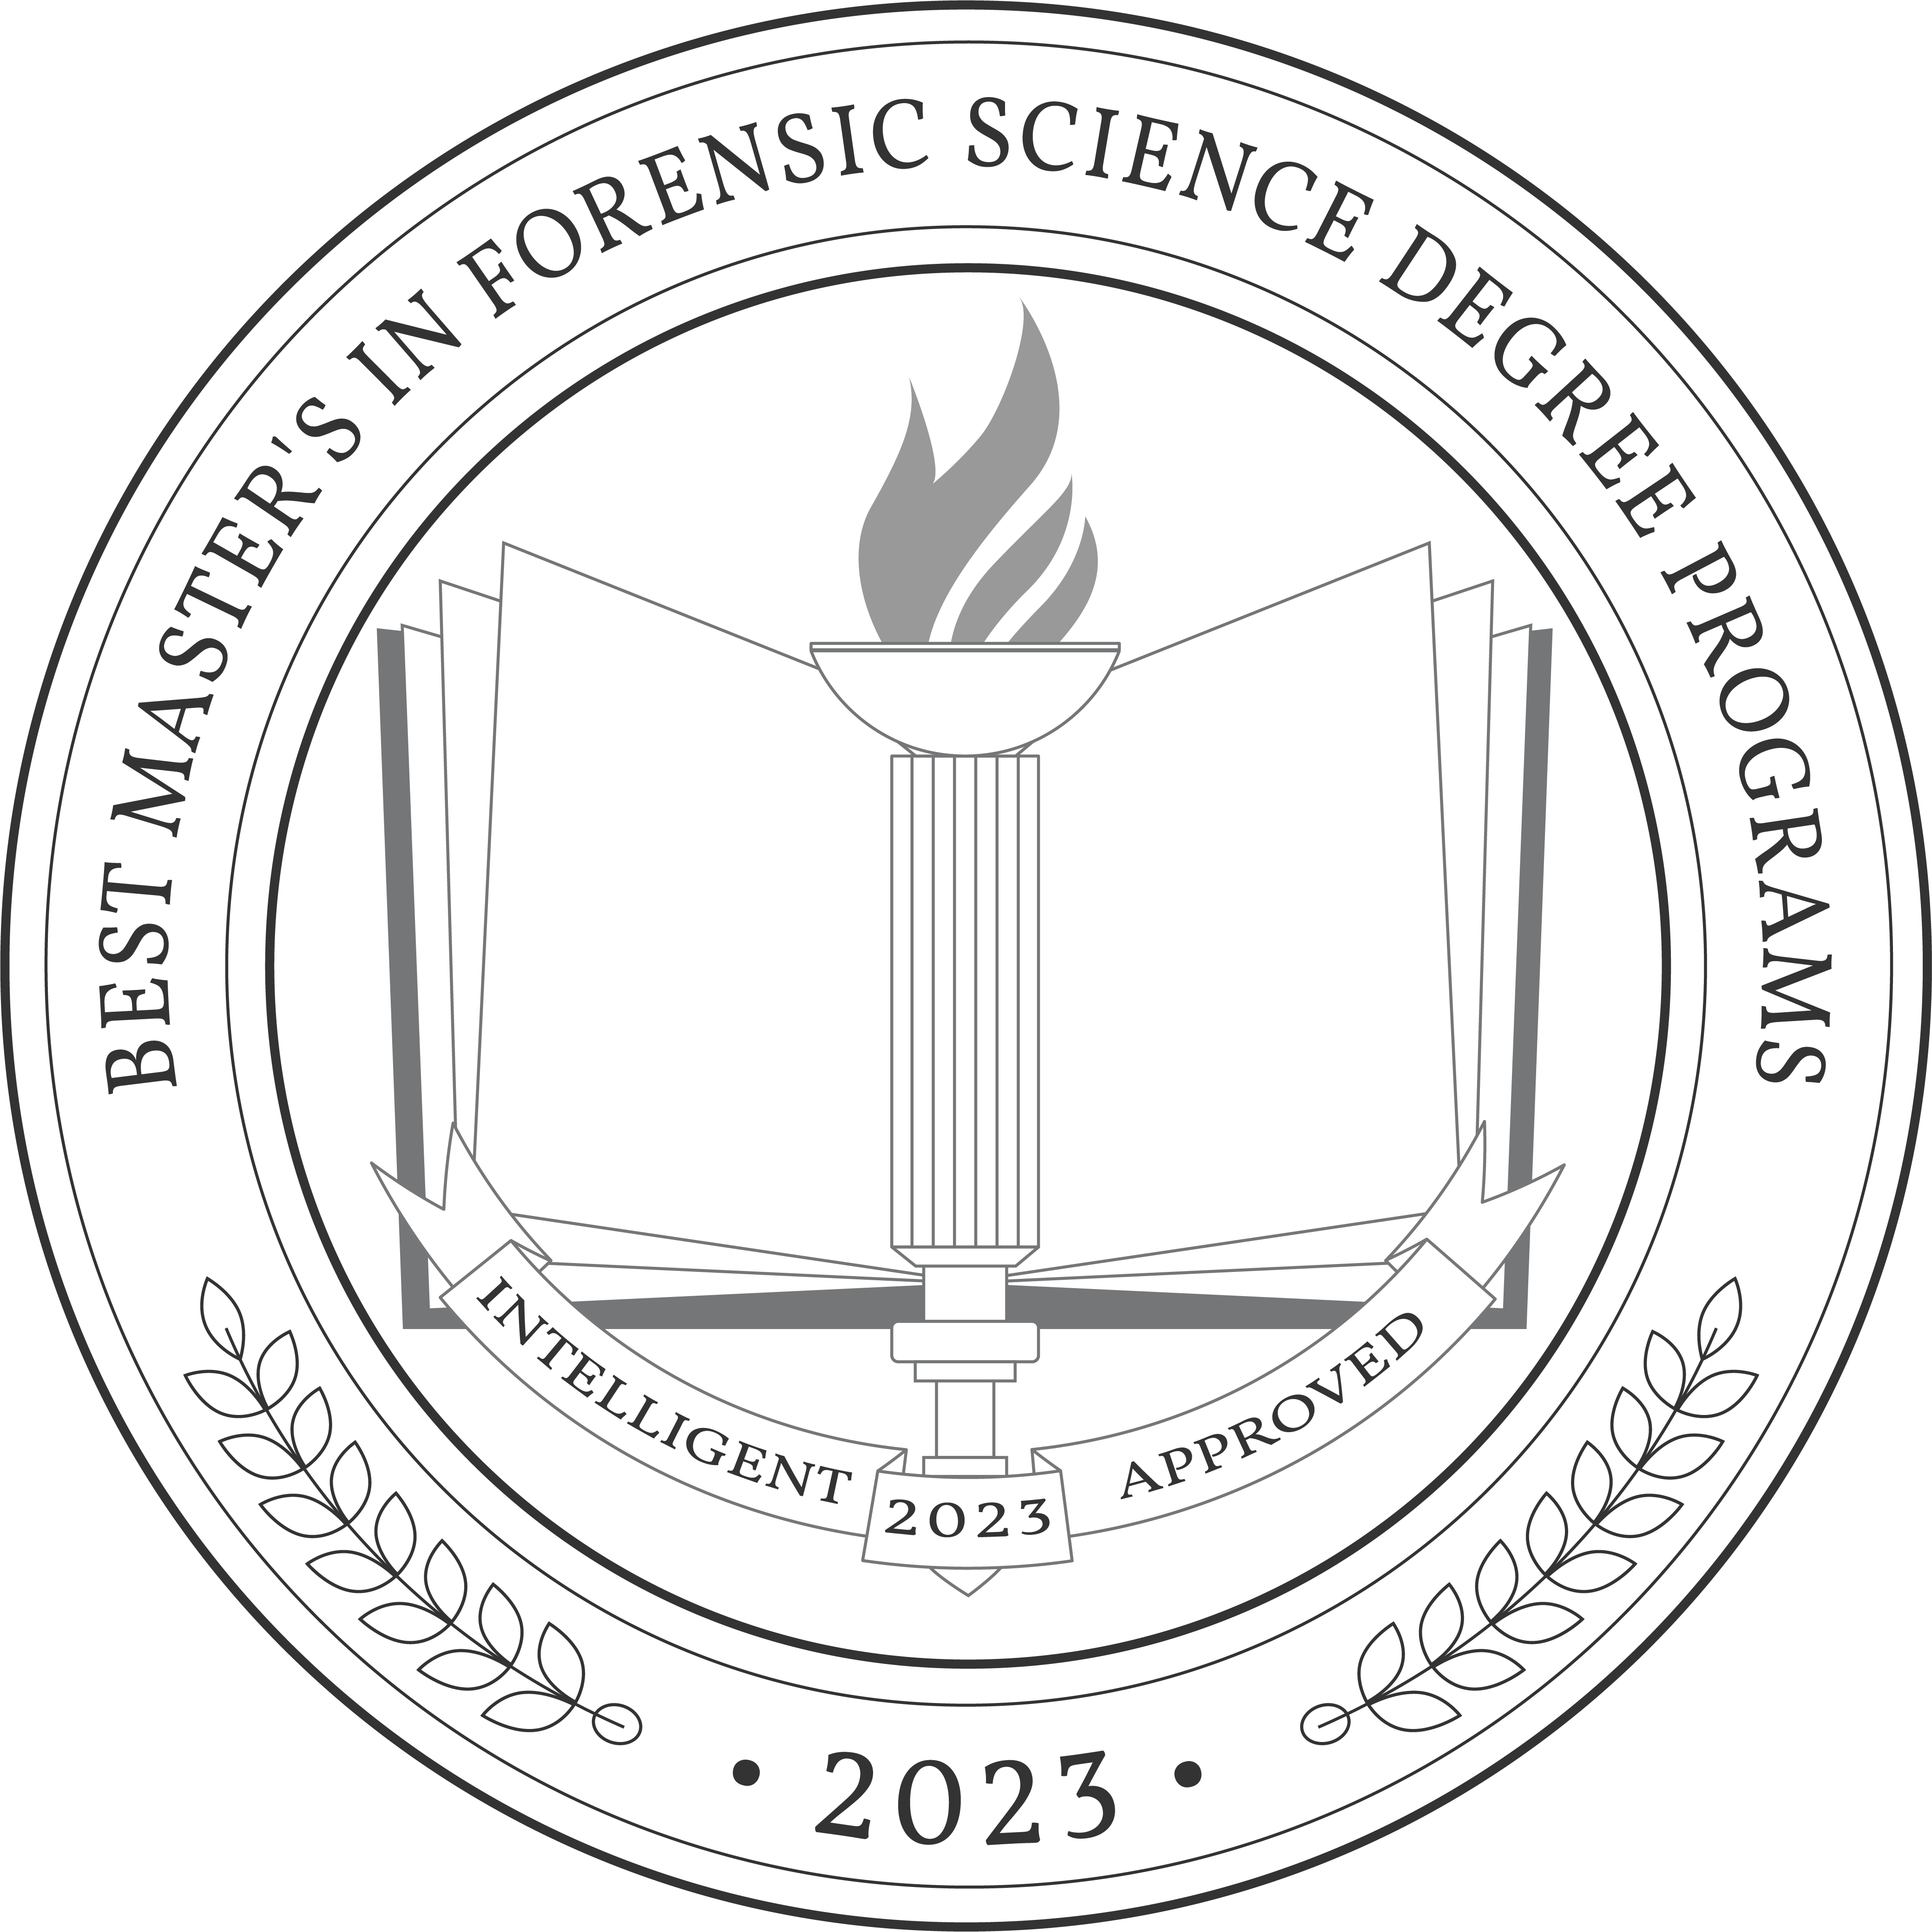 Best Master's in Forensic Science Degree Programs 2023